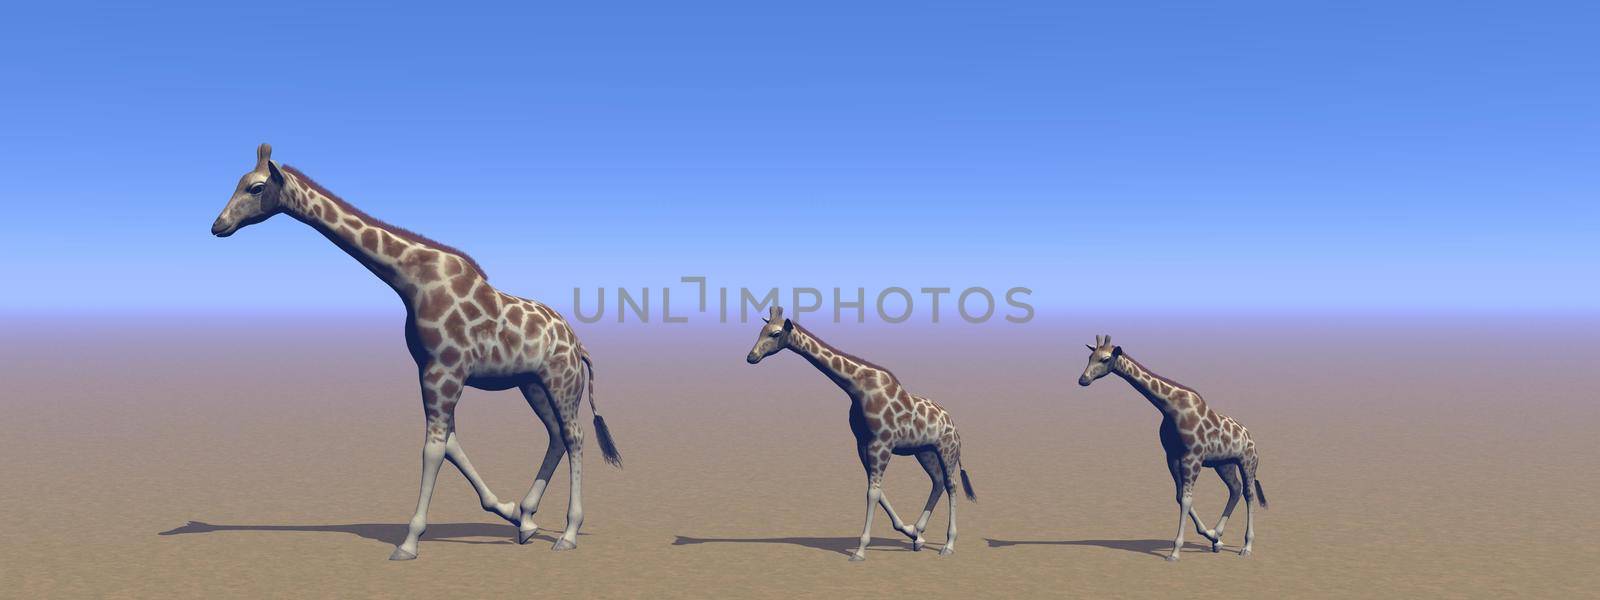 giraffe mom and her little baby and sky - 3d rendering